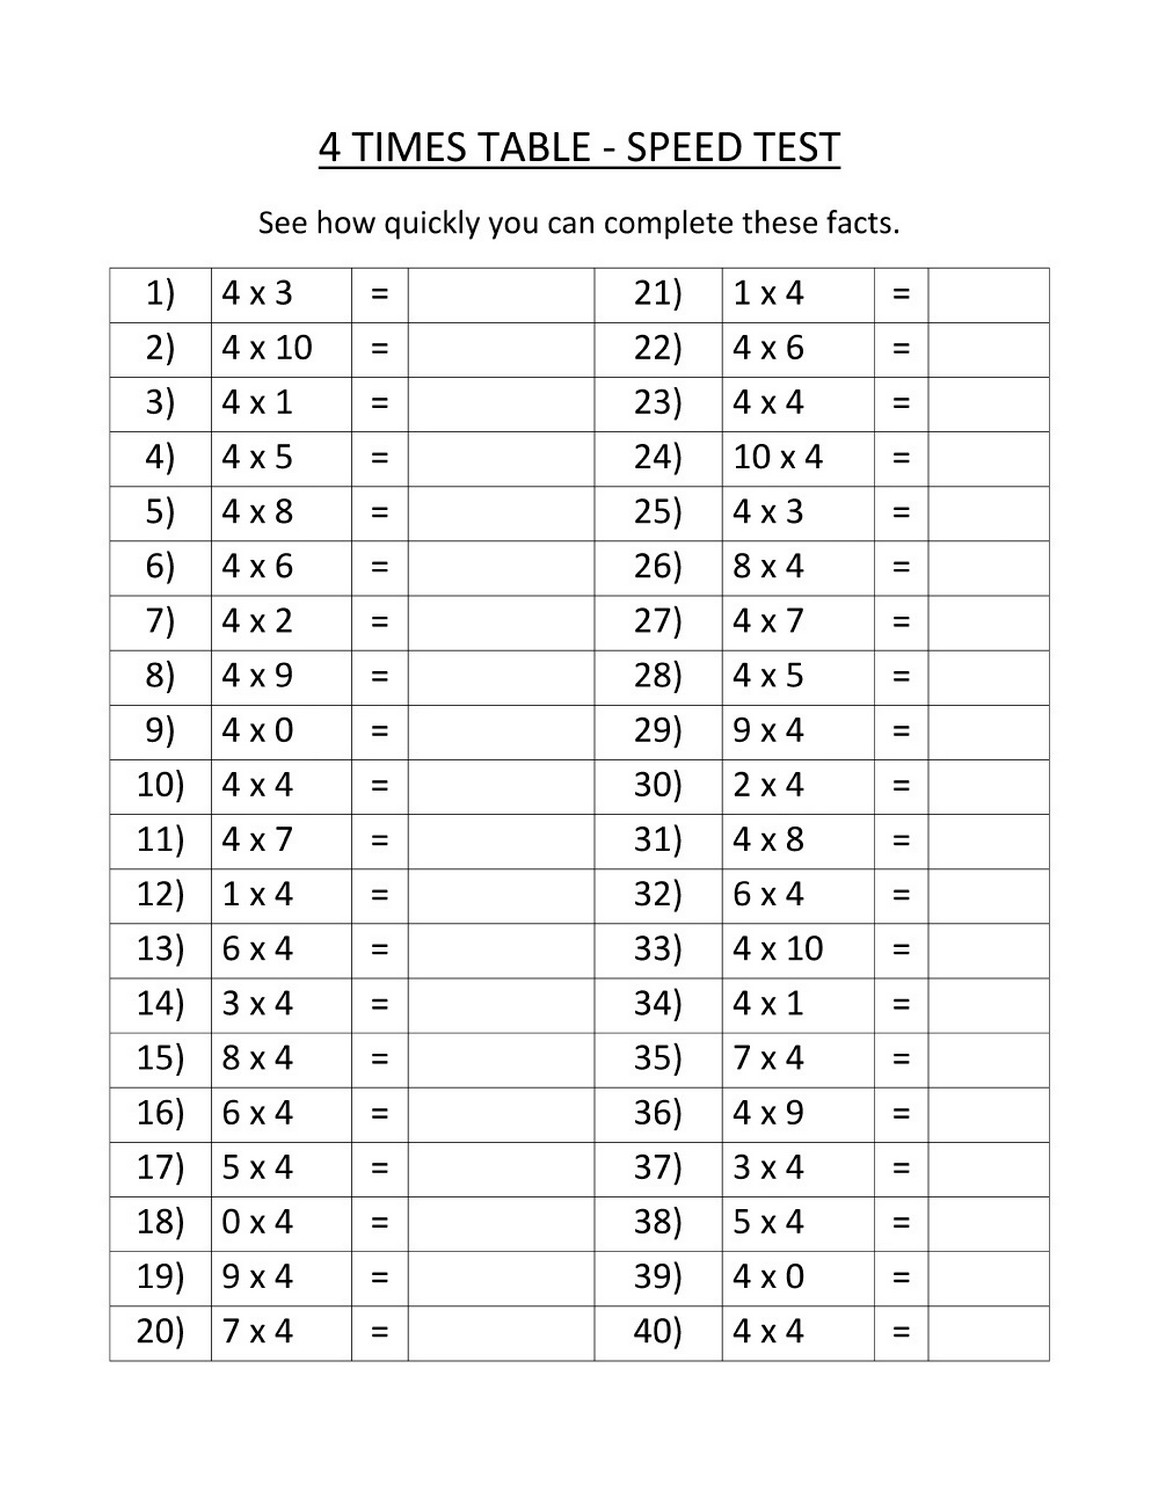 times table exercise basic speed test